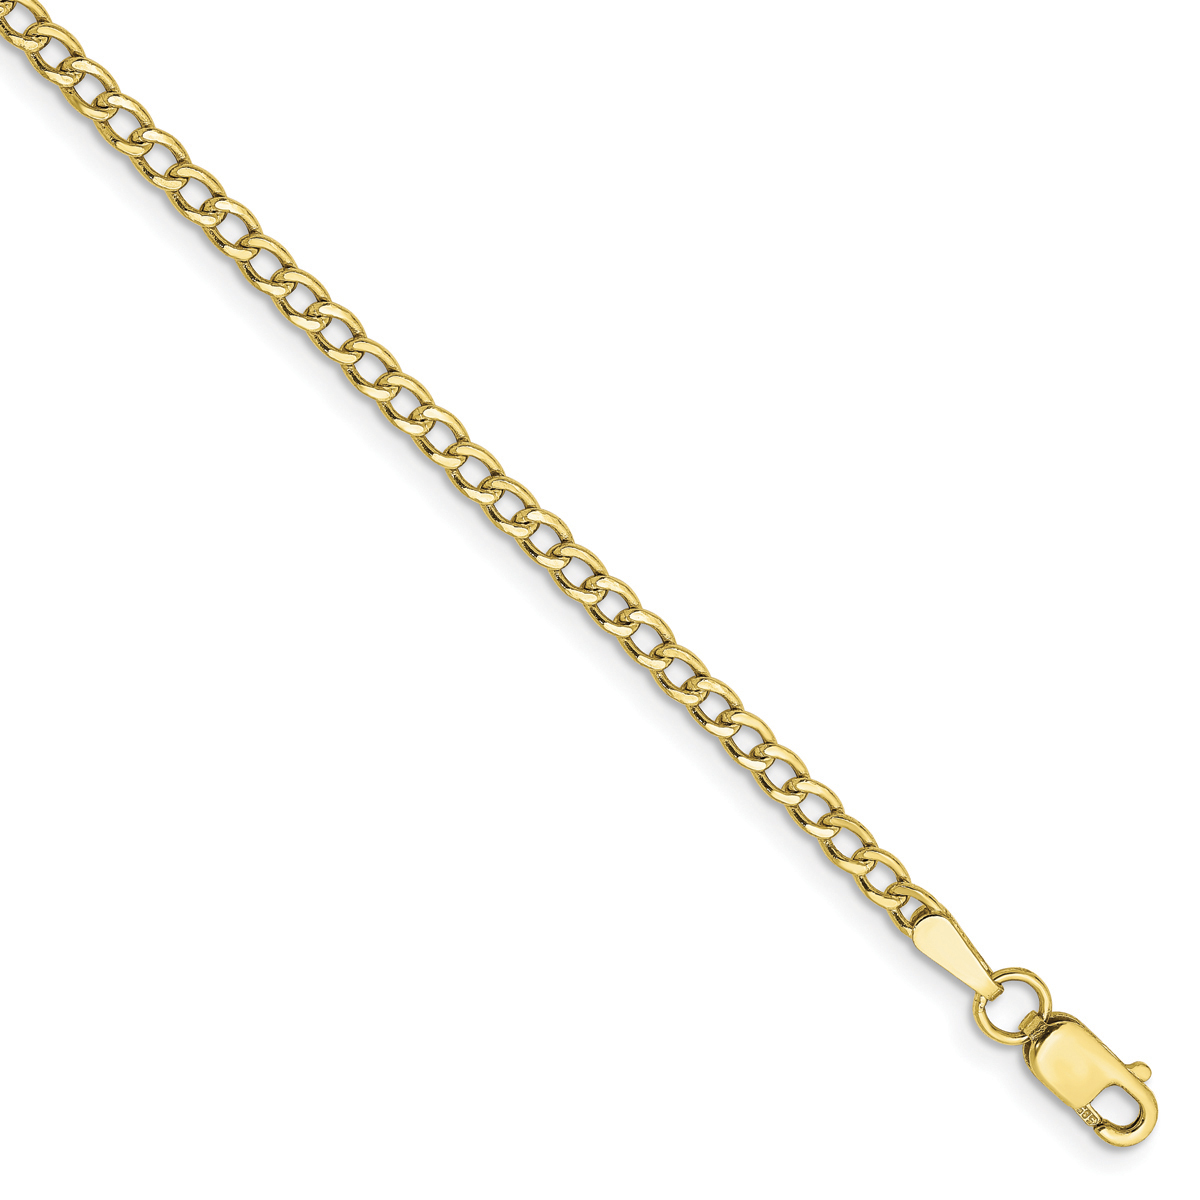 Unisex Gold Classics(tm) 10kt. 2.5mm 18in. Semi-Solid Chain Necklace